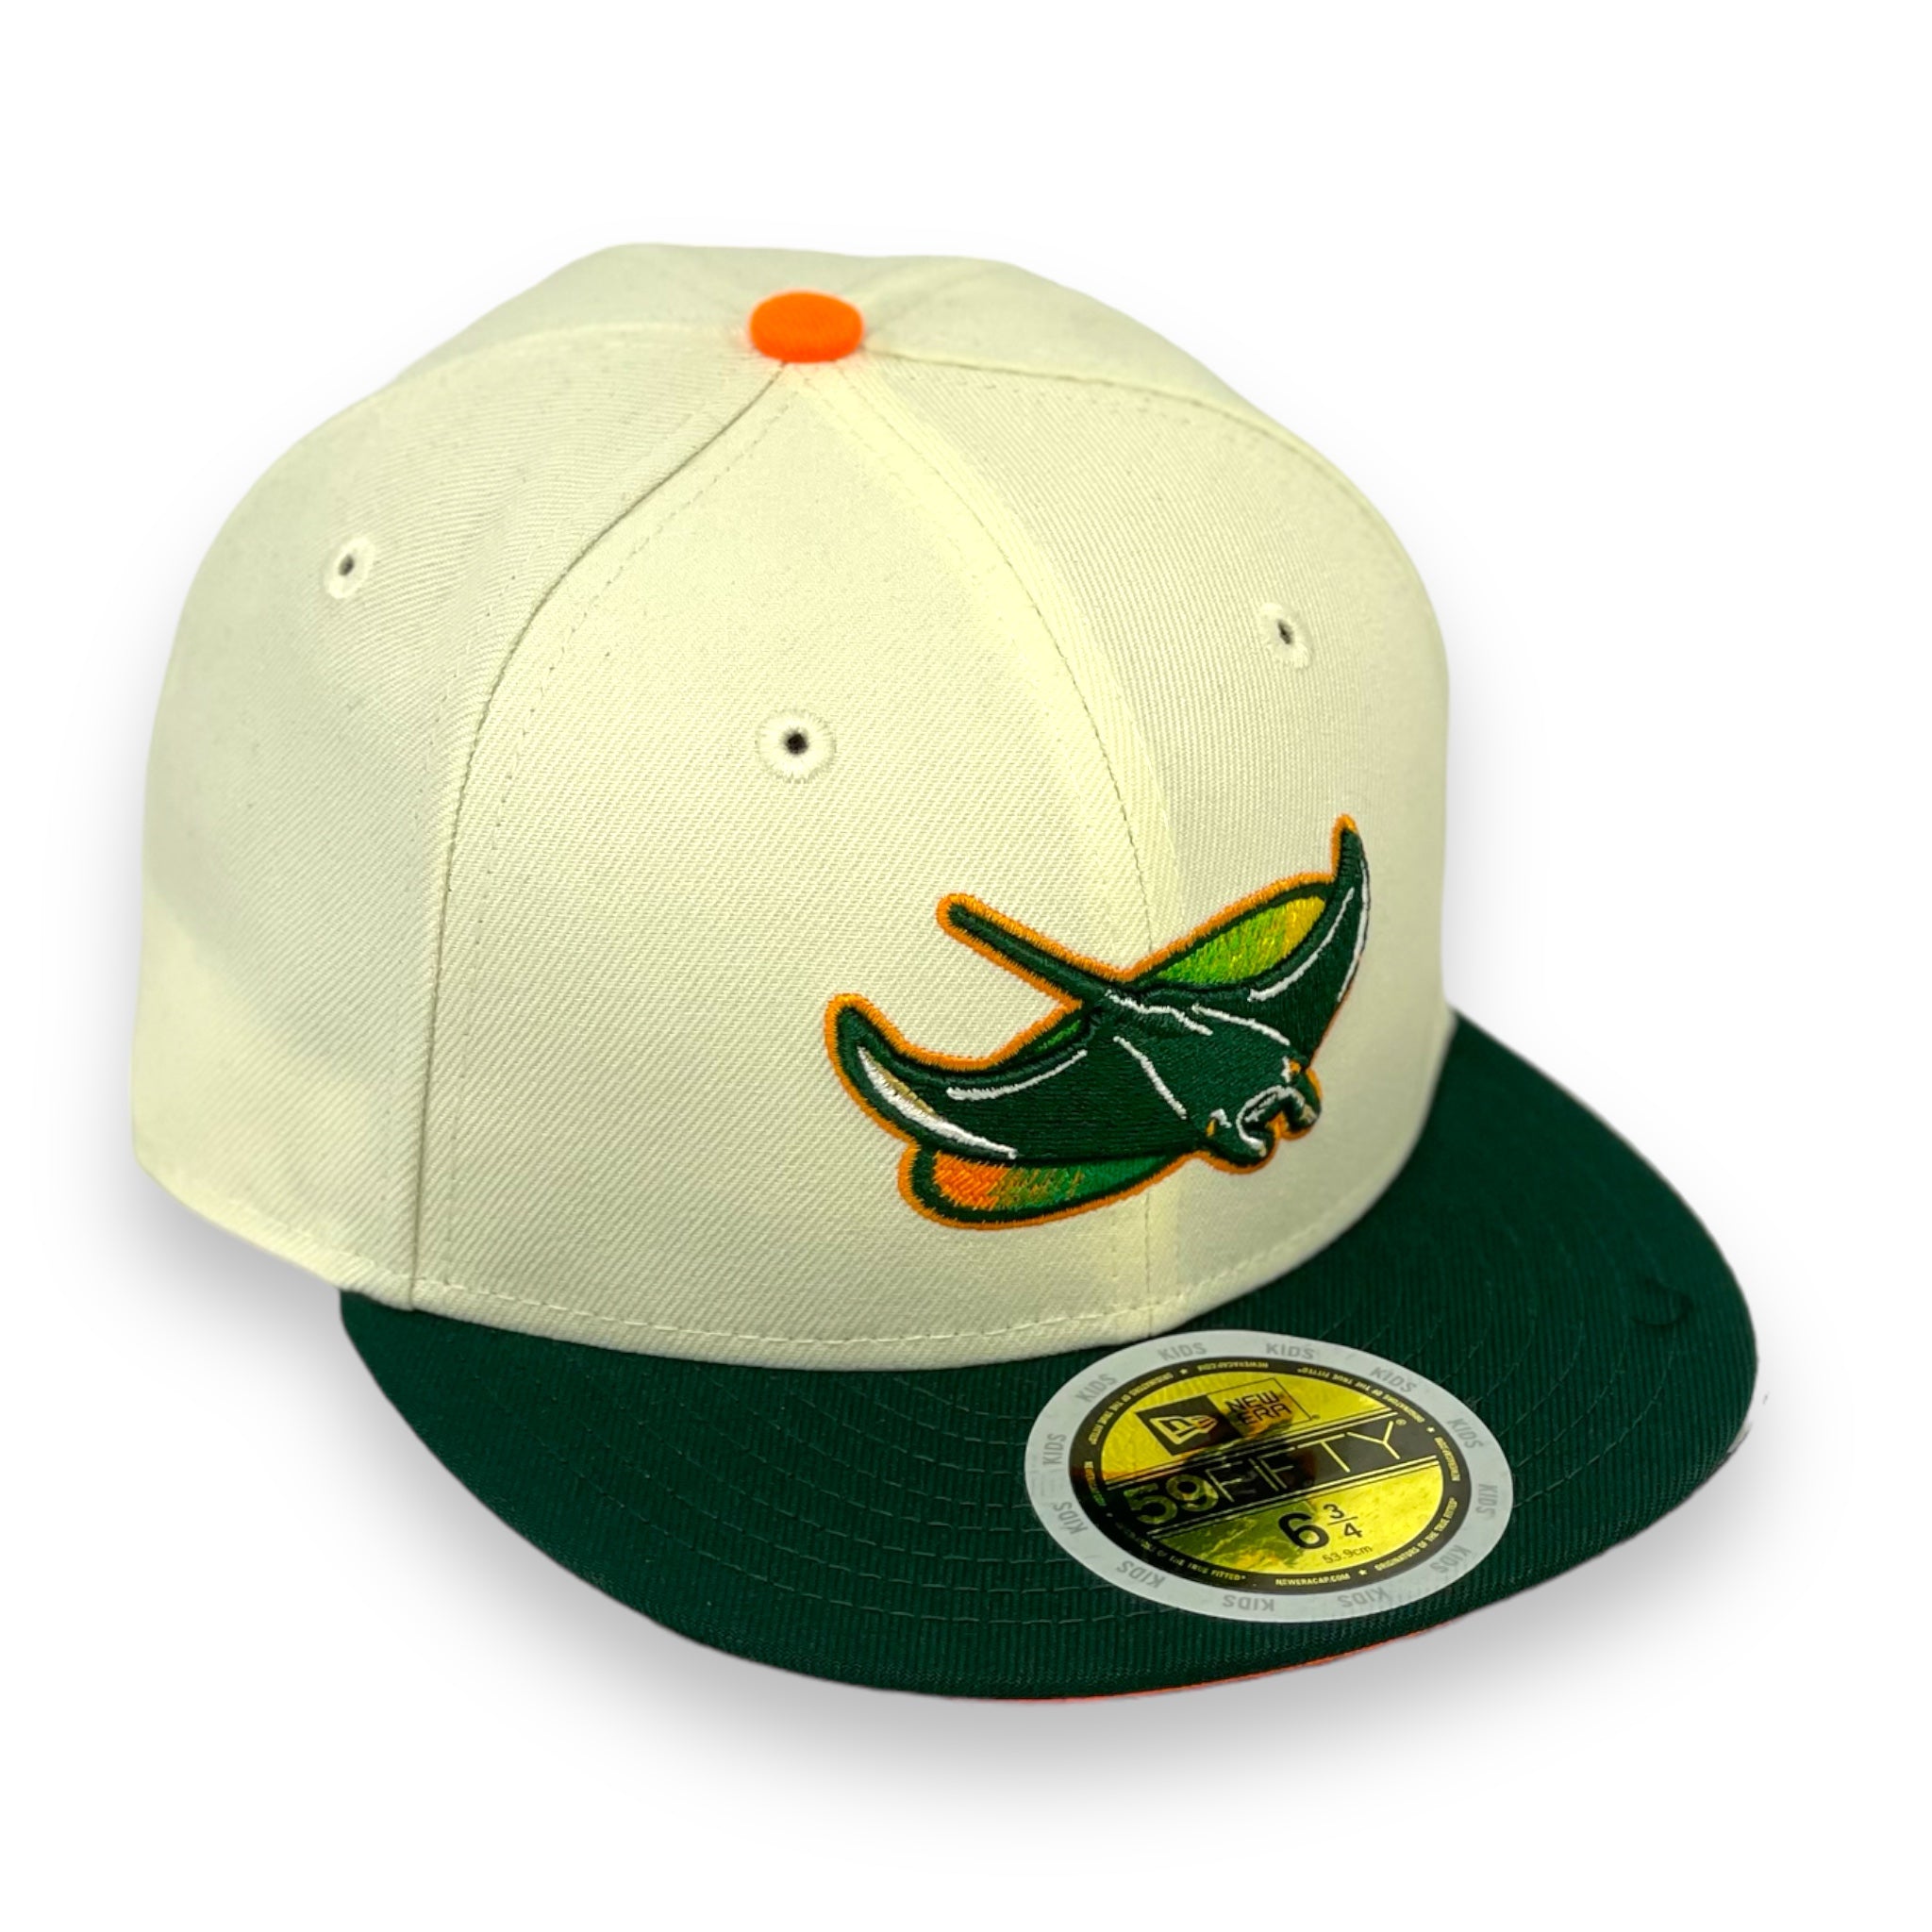 “KIDS” - TAMPA RAYS (OFF-WHITE) NEW ERA 59FIFTY FITTED (NEON UNDER VISOR)